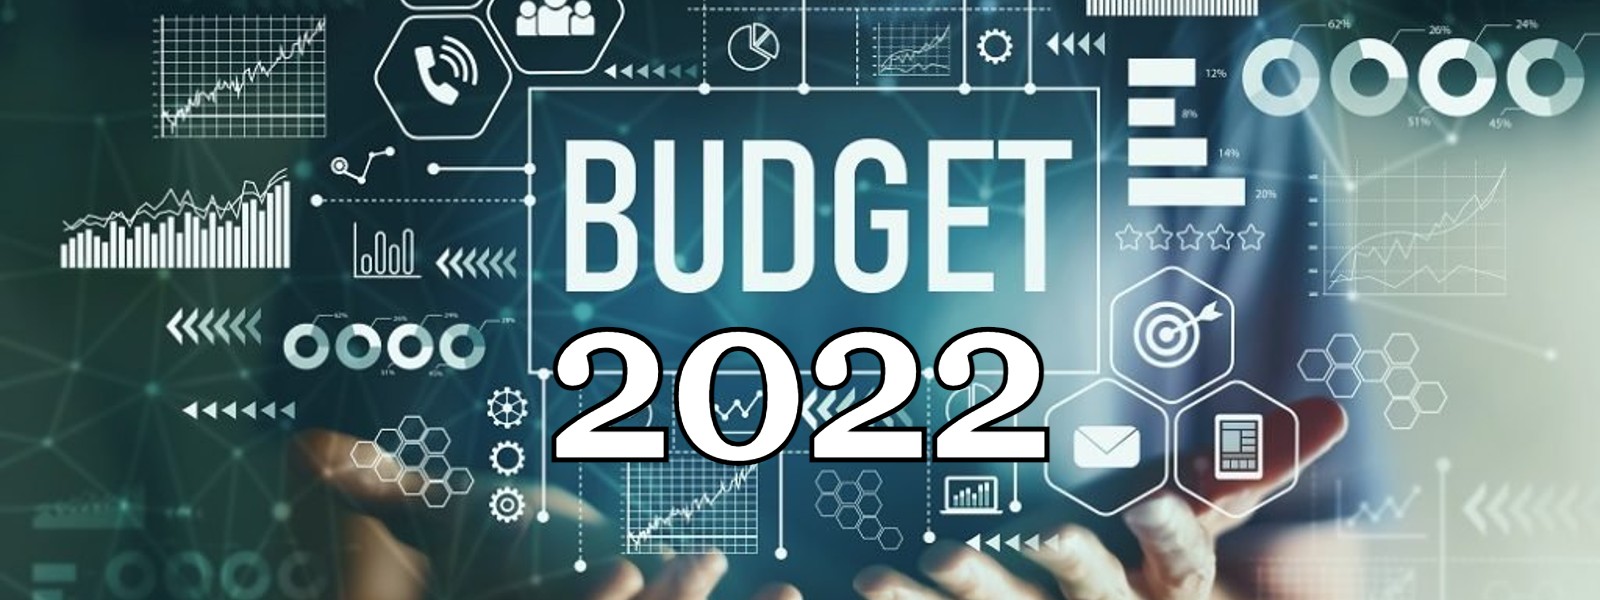 BUDGET 2022 to be presented in Parliament today